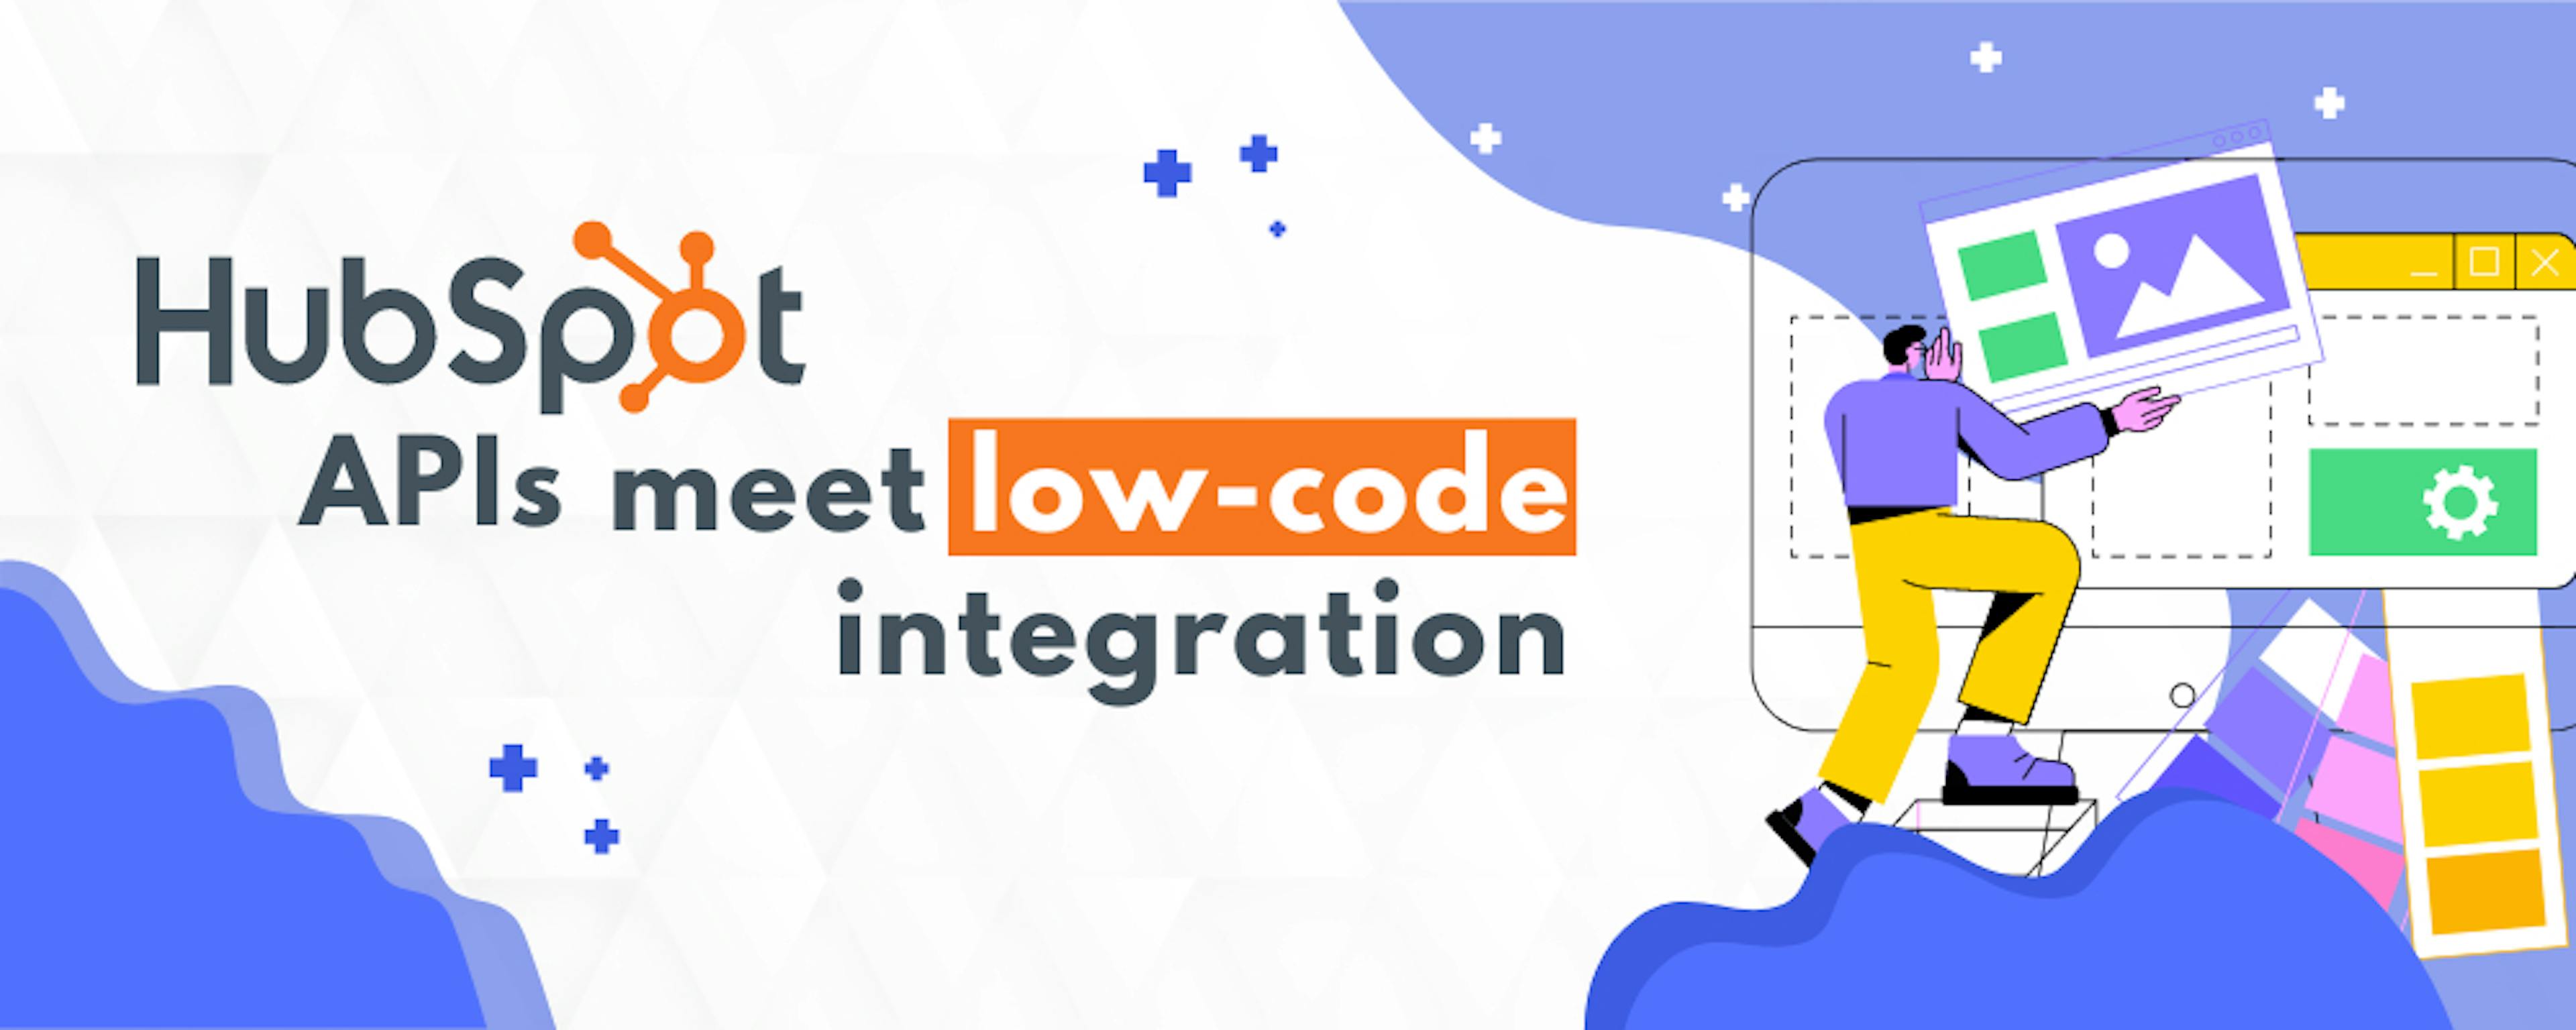 /unleashing-hubspots-potential-leveraging-low-code-integration-for-hyper-personalized-apps feature image